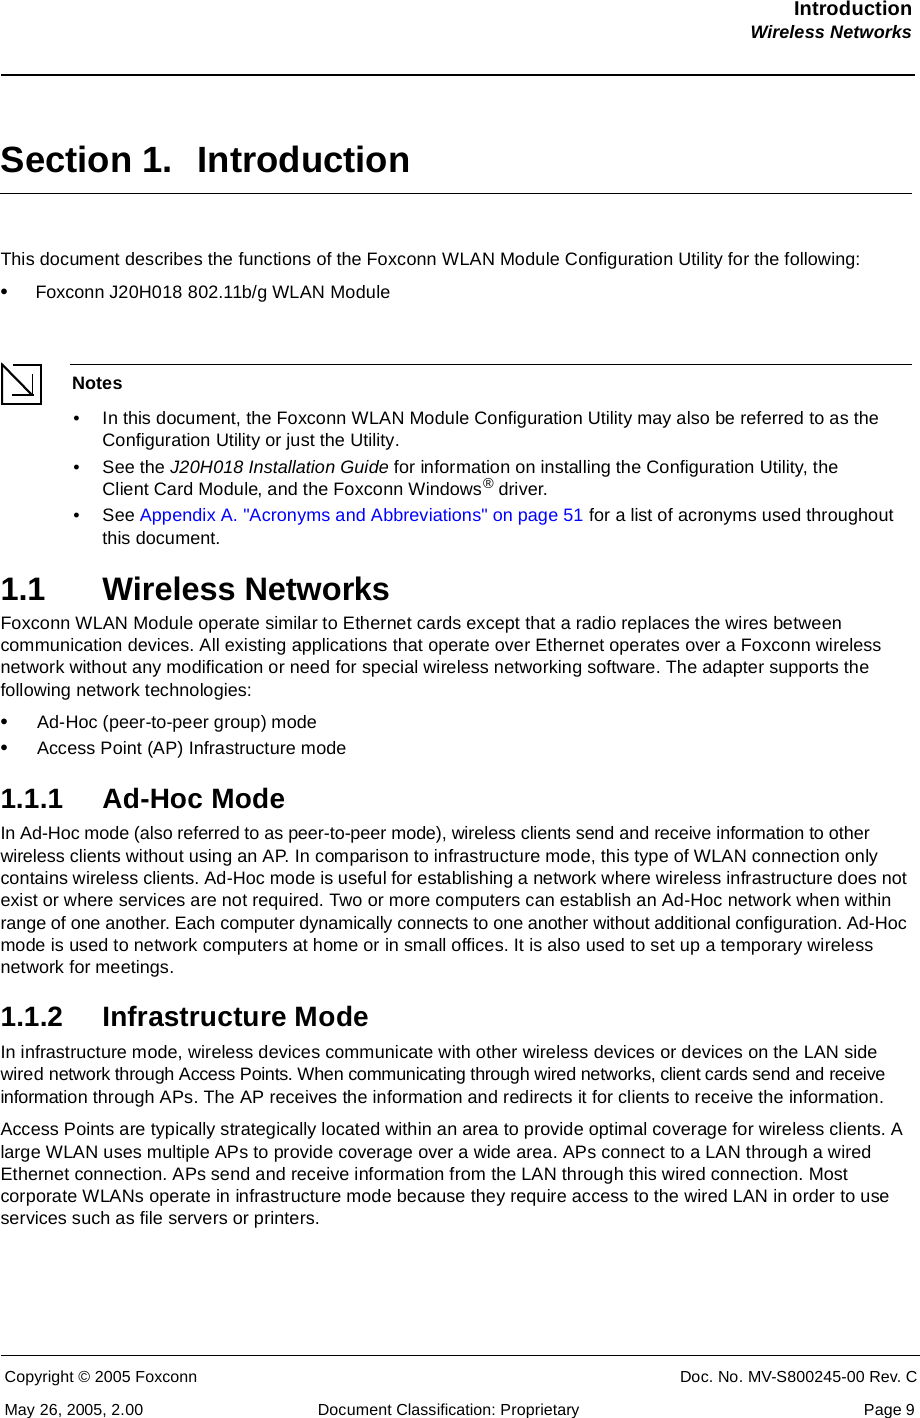 IntroductionWireless NetworksCopyright © 2005 Foxconn CONFIDENT Doc. No. MV-S800245-00 Rev. CMay 26, 2005, 2.00 Document Classification: Proprietary  Page 9Section 1. IntroductionThis document describes the functions of the Foxconn WLAN Module Configuration Utility for the following:•Foxconn J20H018 802.11b/g WLAN ModuleNotes• In this document, the Foxconn WLAN Module Configuration Utility may also be referred to as the Configuration Utility or just the Utility. • See the J20H018 Installation Guide for information on installing the Configuration Utility, the Client Card Module, and the Foxconn Windows® driver.• See Appendix A. &quot;Acronyms and Abbreviations&quot; on page 51 for a list of acronyms used throughout this document.1.1 Wireless NetworksFoxconn WLAN Module operate similar to Ethernet cards except that a radio replaces the wires between communication devices. All existing applications that operate over Ethernet operates over a Foxconn wireless network without any modification or need for special wireless networking software. The adapter supports the following network technologies:•Ad-Hoc (peer-to-peer group) mode•Access Point (AP) Infrastructure mode1.1.1 Ad-Hoc ModeIn Ad-Hoc mode (also referred to as peer-to-peer mode), wireless clients send and receive information to other wireless clients without using an AP. In comparison to infrastructure mode, this type of WLAN connection only contains wireless clients. Ad-Hoc mode is useful for establishing a network where wireless infrastructure does not exist or where services are not required. Two or more computers can establish an Ad-Hoc network when within range of one another. Each computer dynamically connects to one another without additional configuration. Ad-Hoc mode is used to network computers at home or in small offices. It is also used to set up a temporary wireless network for meetings.1.1.2 Infrastructure ModeIn infrastructure mode, wireless devices communicate with other wireless devices or devices on the LAN side wired network through Access Points. When communicating through wired networks, client cards send and receive information through APs. The AP receives the information and redirects it for clients to receive the information.Access Points are typically strategically located within an area to provide optimal coverage for wireless clients. A large WLAN uses multiple APs to provide coverage over a wide area. APs connect to a LAN through a wired Ethernet connection. APs send and receive information from the LAN through this wired connection. Most corporate WLANs operate in infrastructure mode because they require access to the wired LAN in order to use services such as file servers or printers.